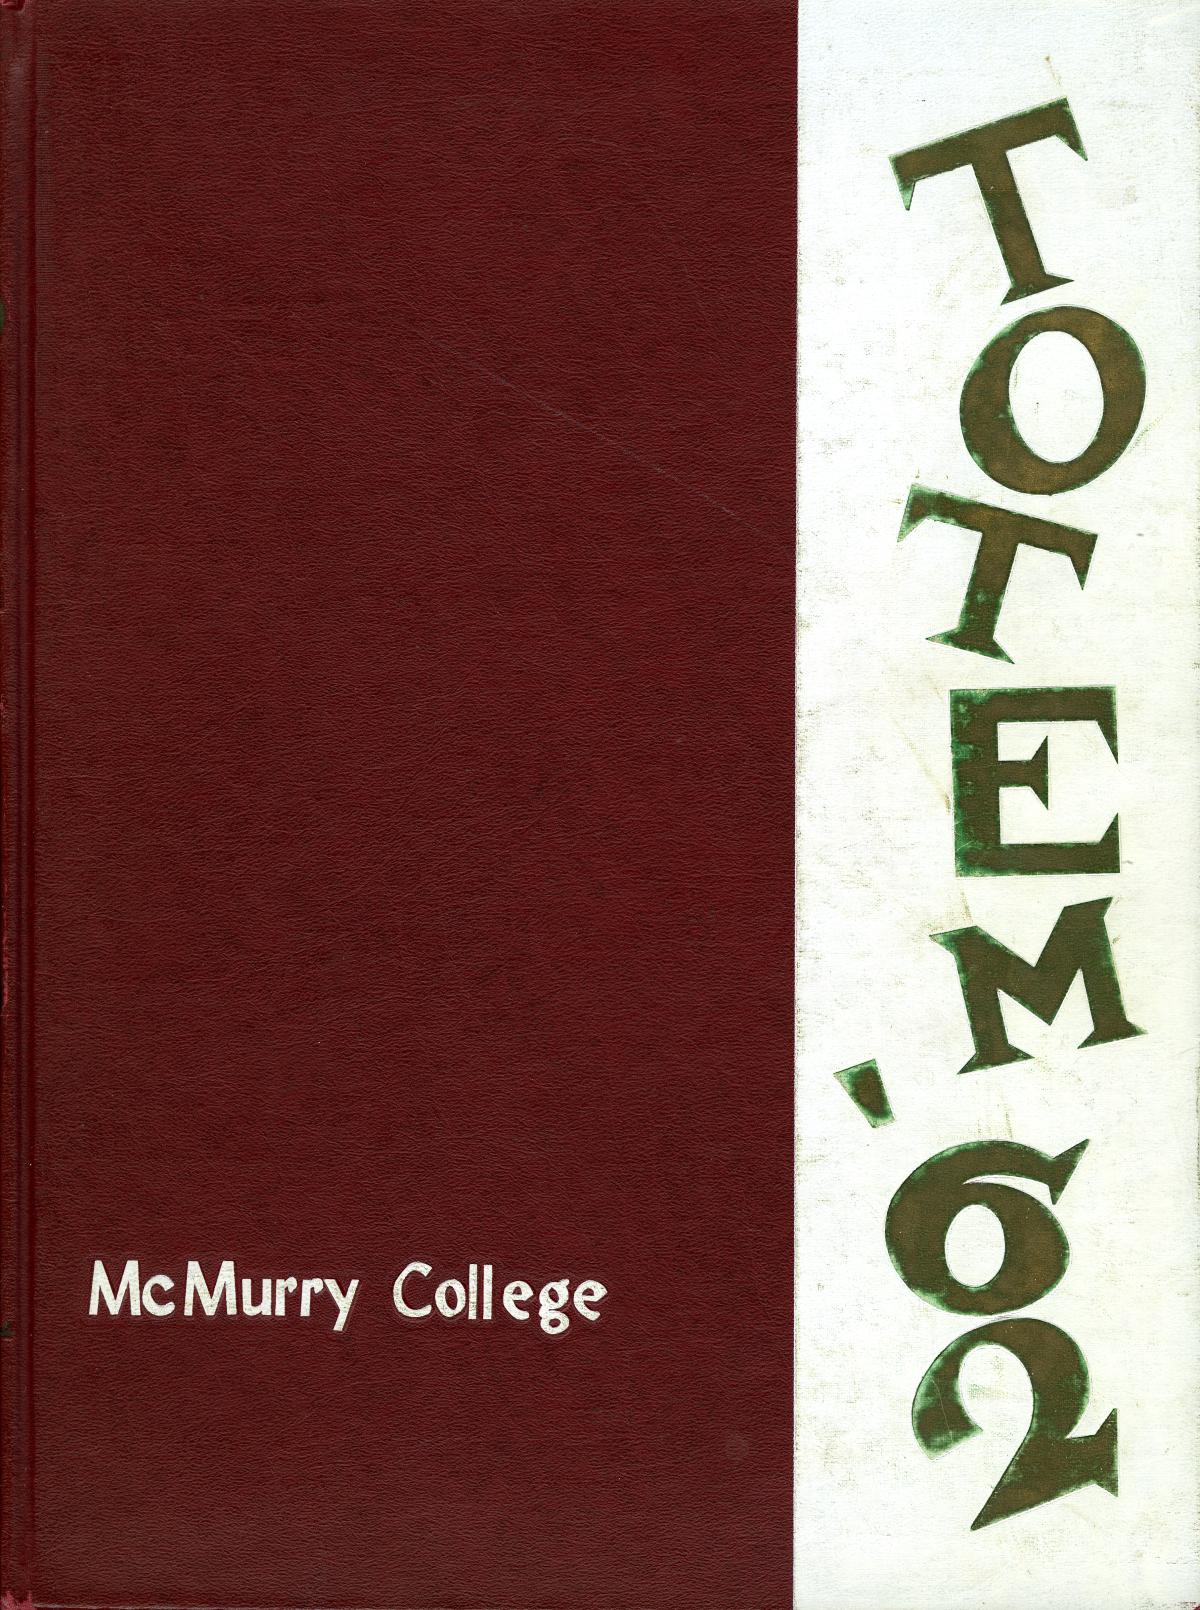 The Totem, Yearbook of McMurry College, 1962
                                                
                                                    Front Cover
                                                